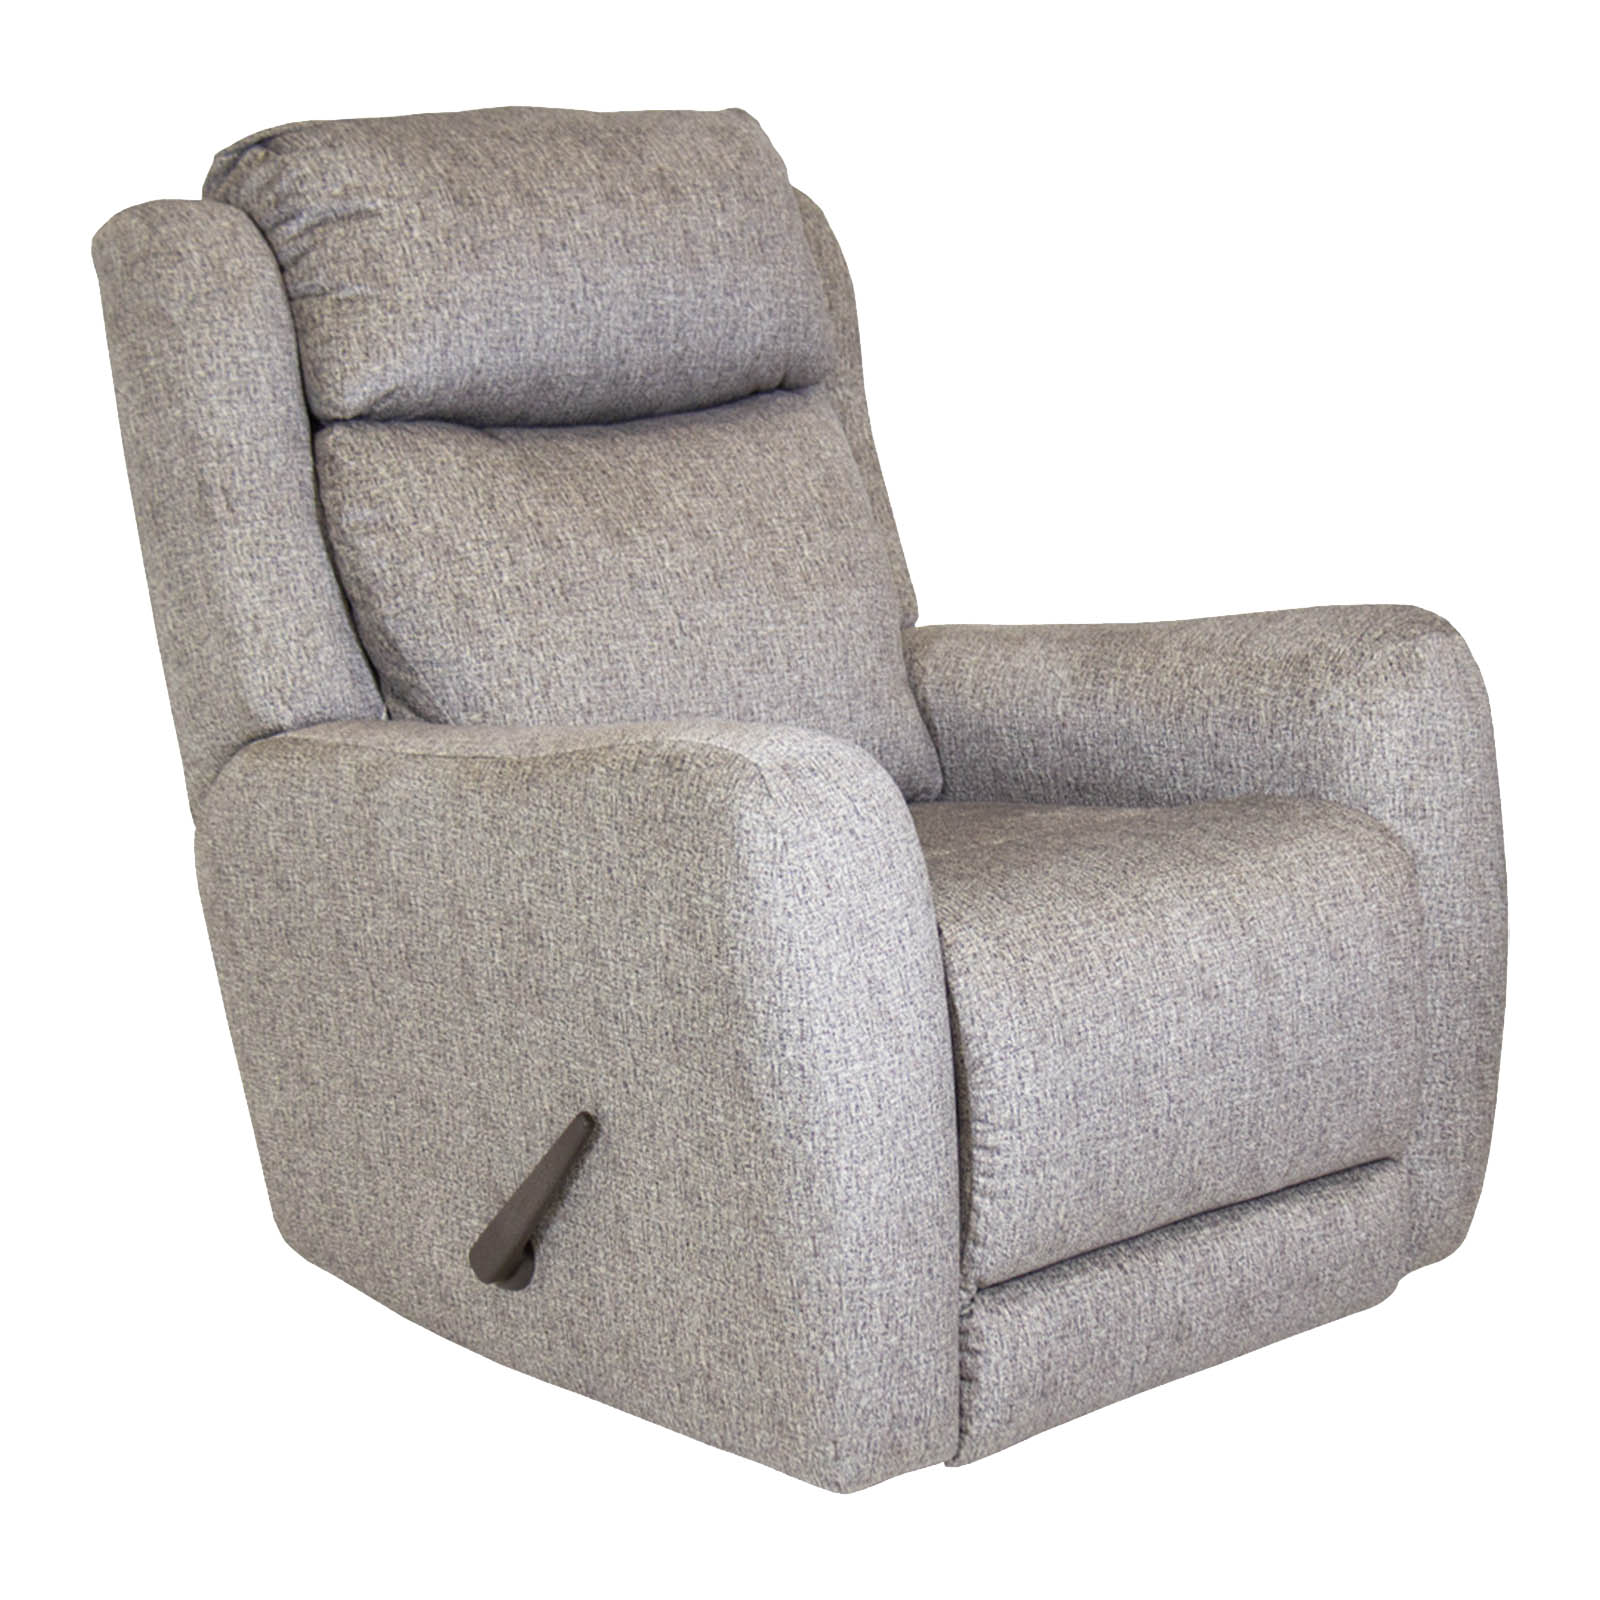 Southern Motion Viewpoint Cyberspace Driftwood Rocker Recliner